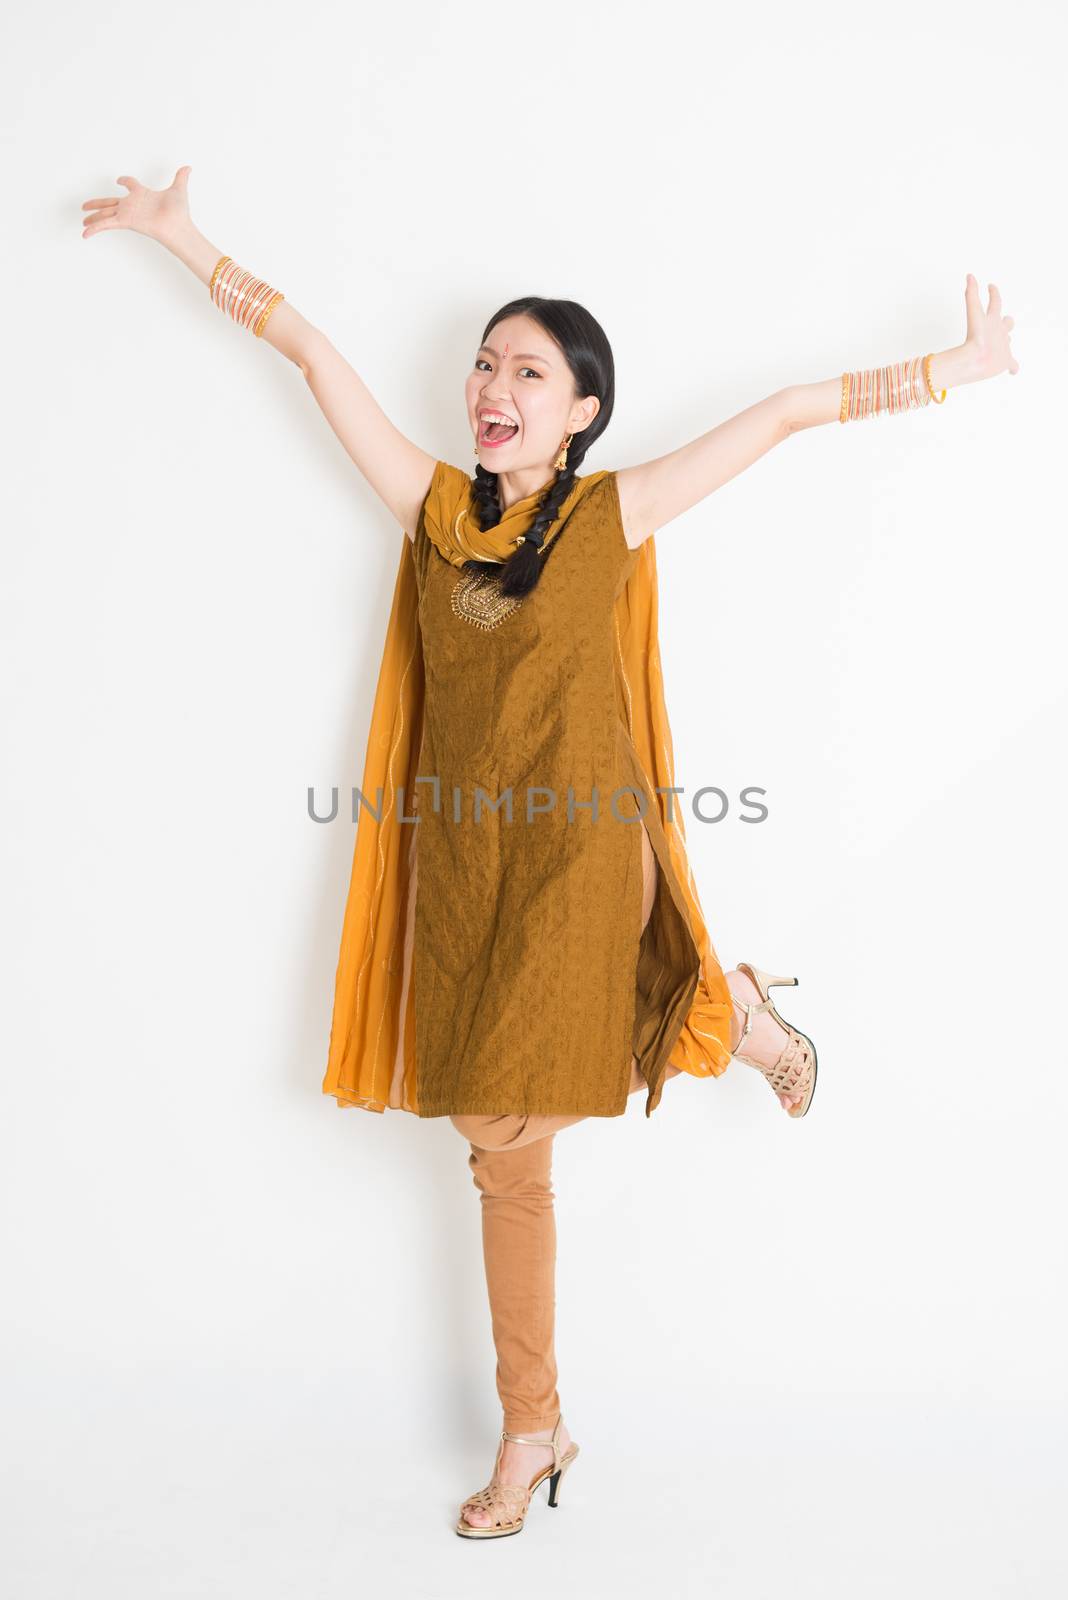 Excited Indian Chinese girl arms raised by szefei